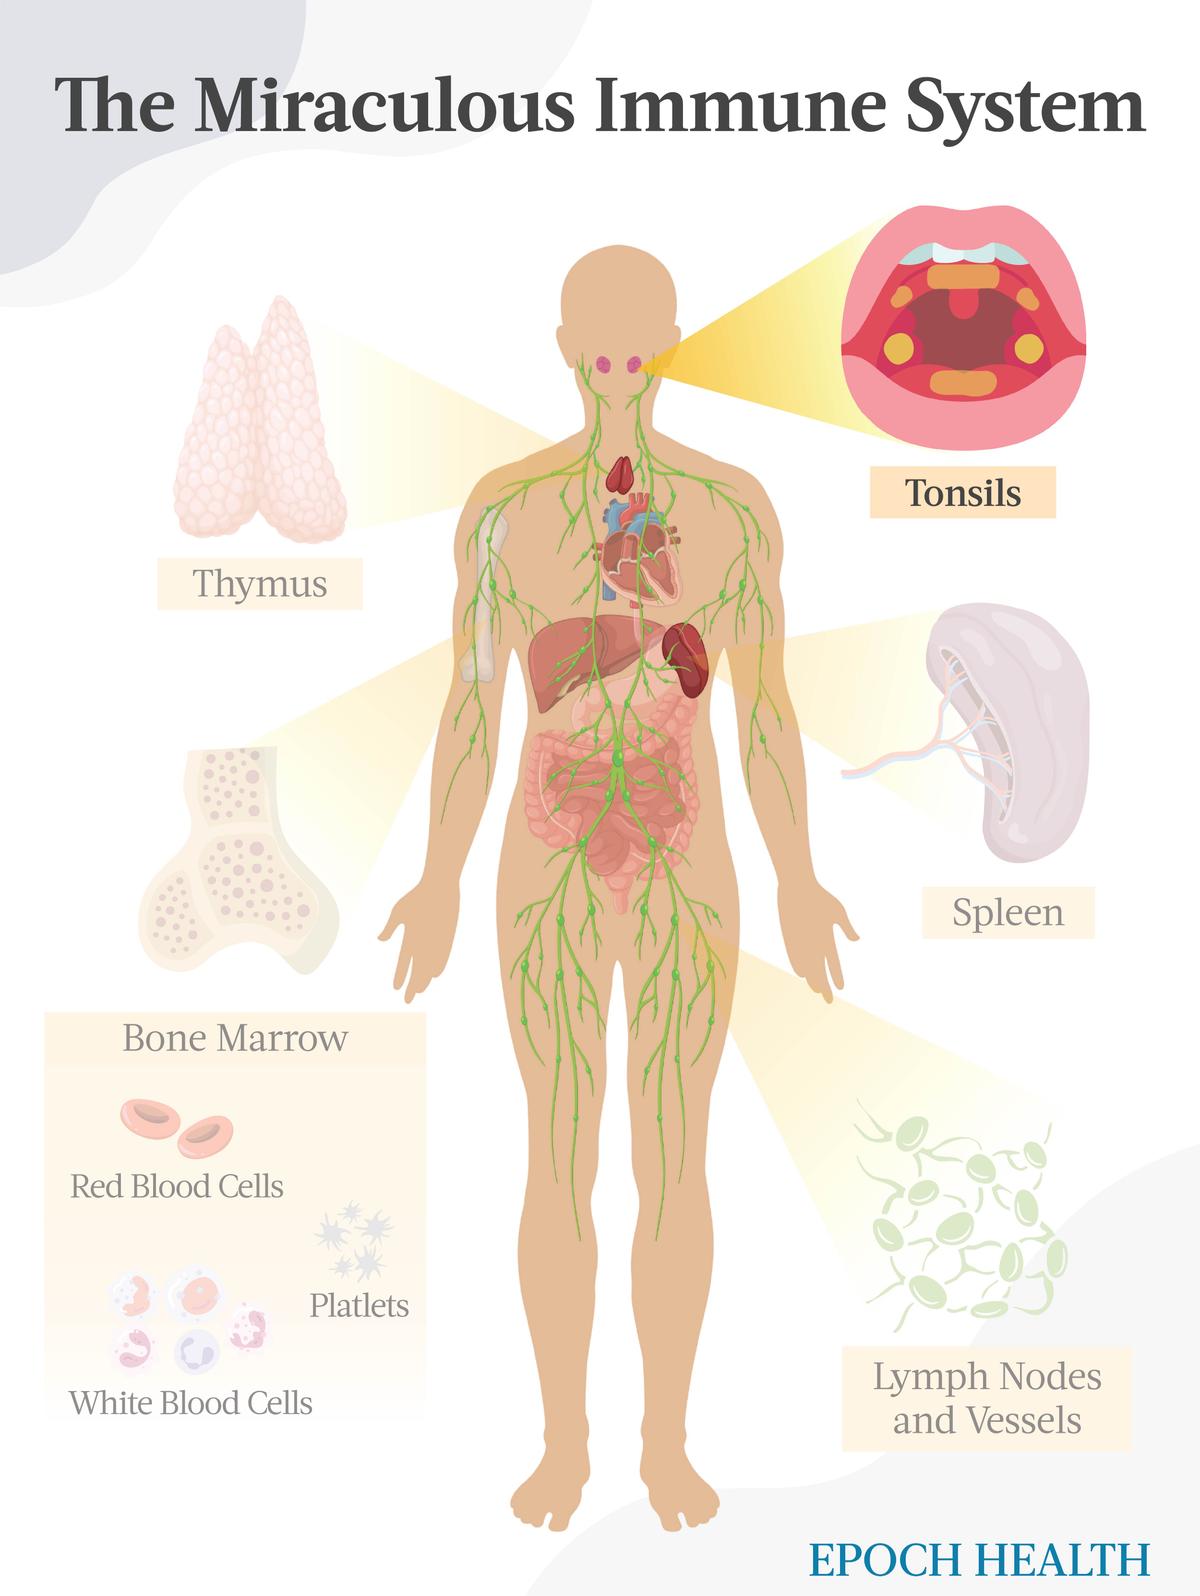  The Miraculous Immune System (The Epoch Times)